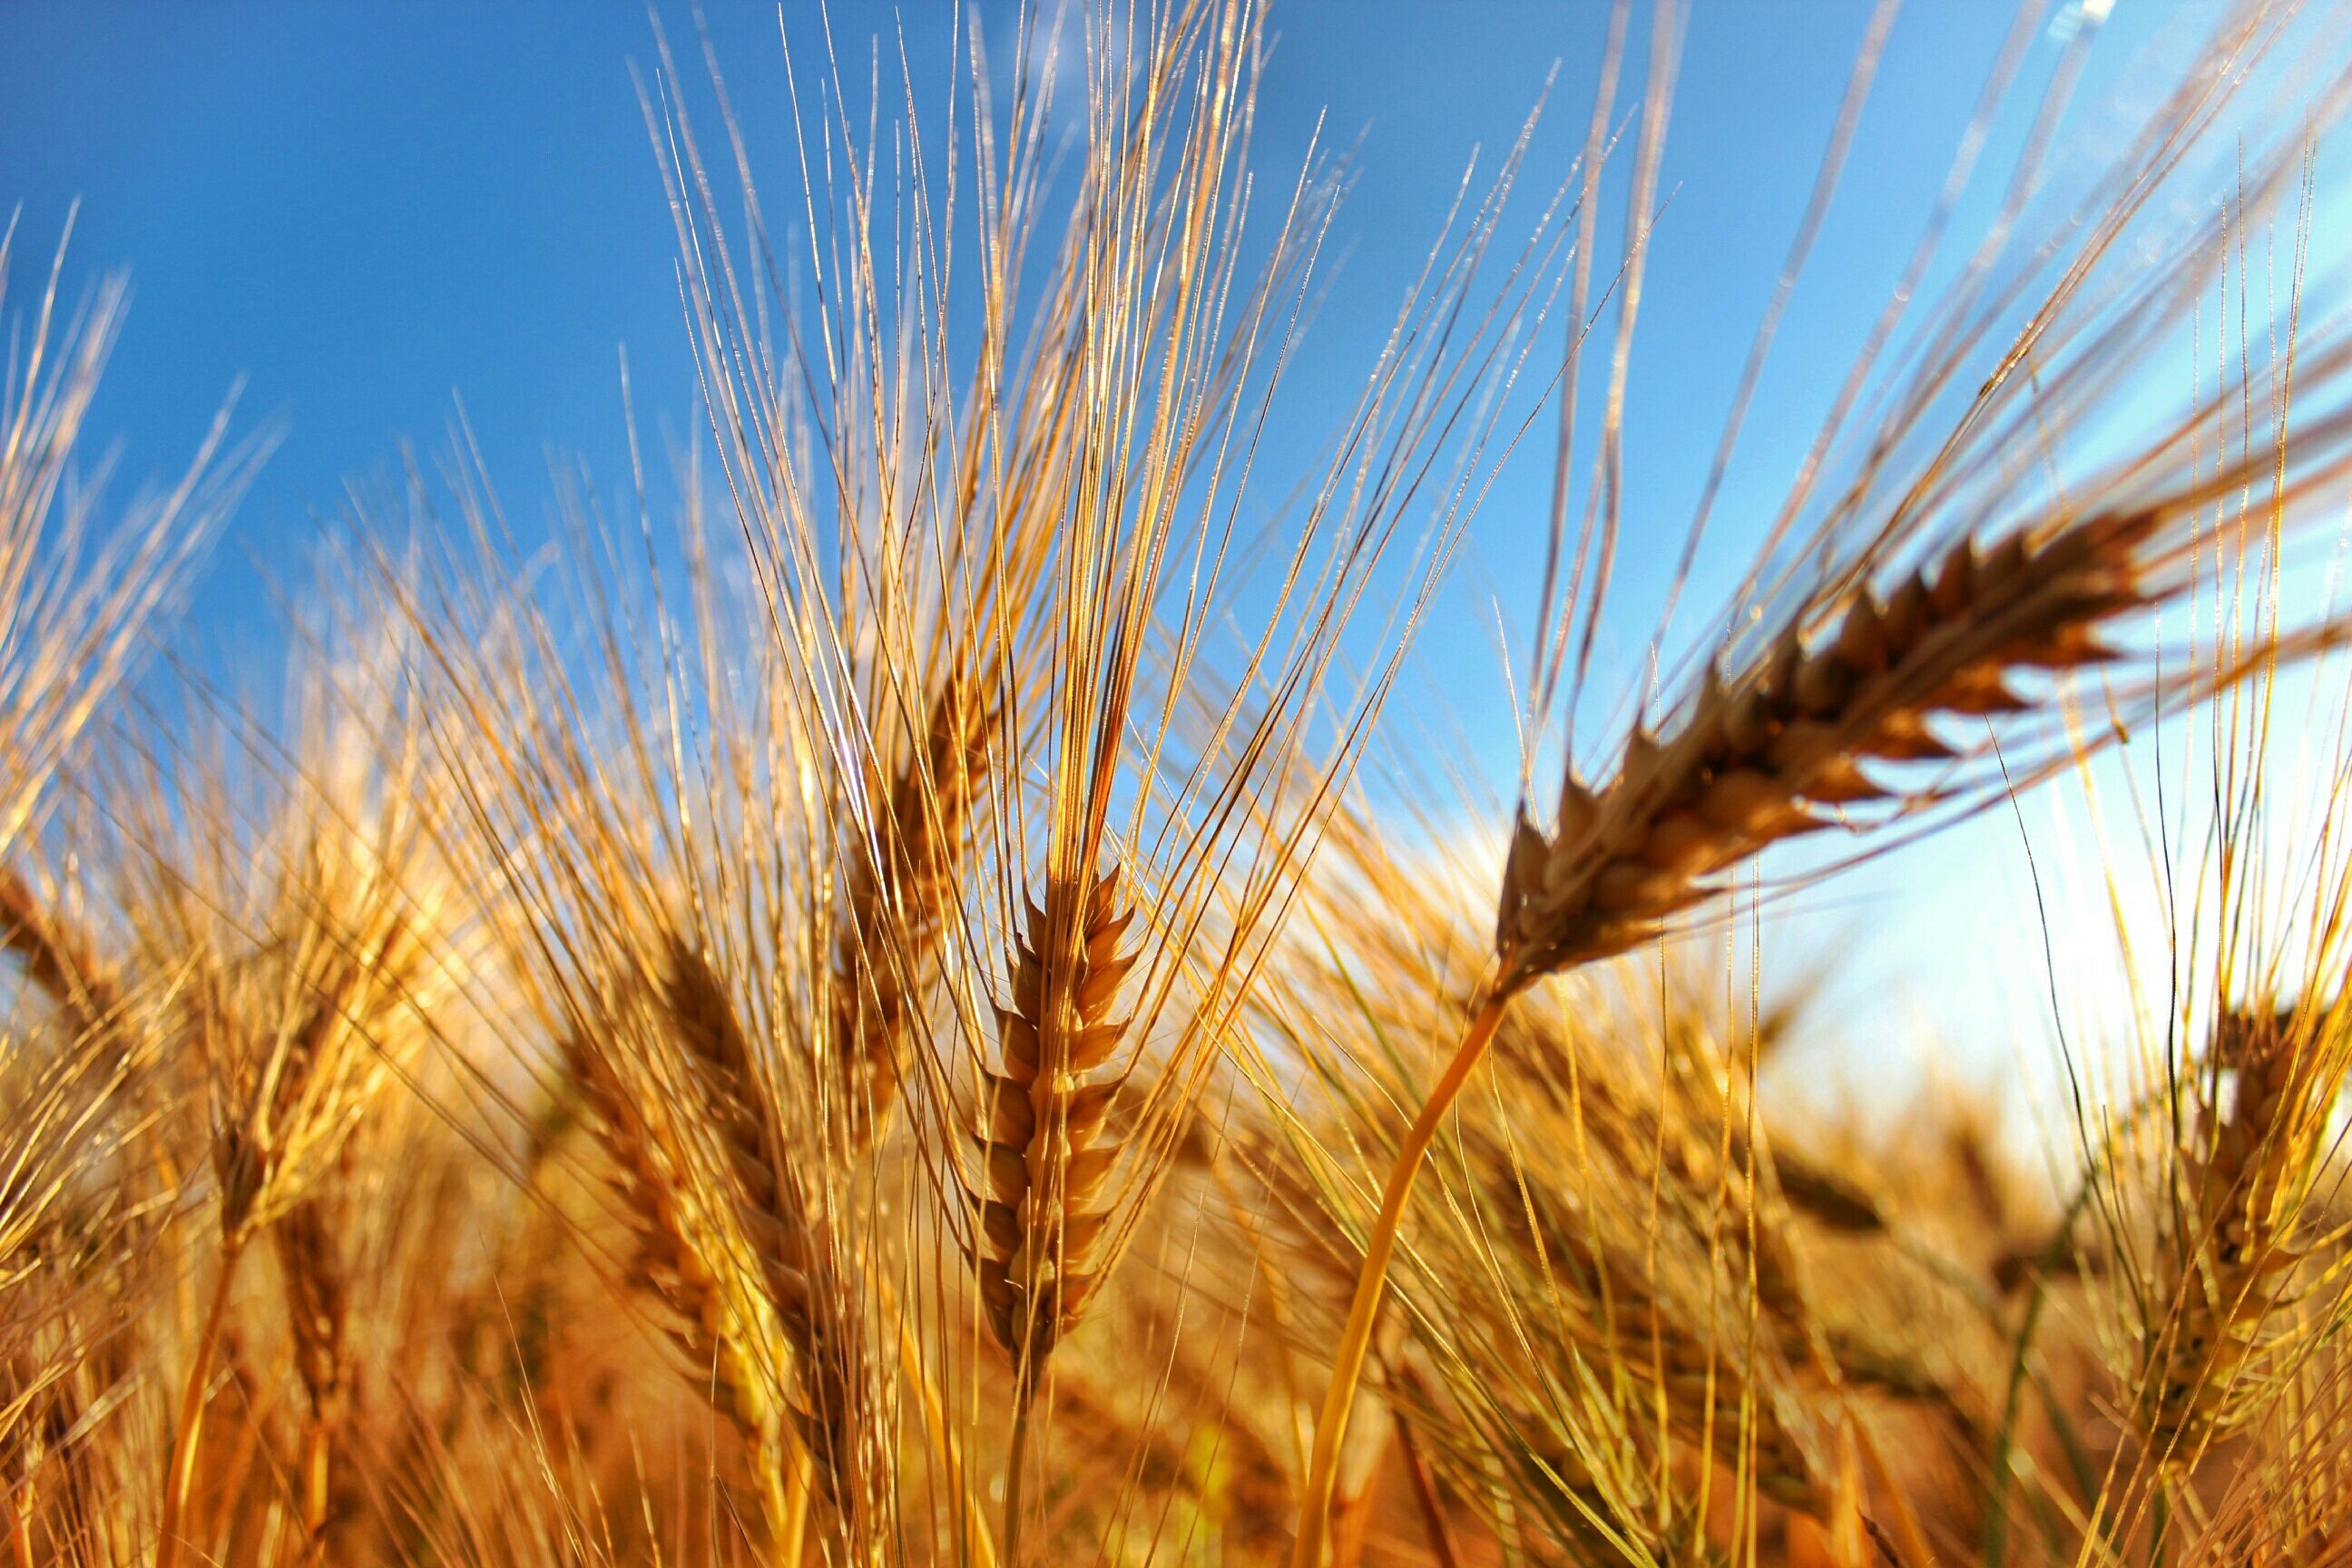 Learn About Grain Opportunities for the Futures of Wheat